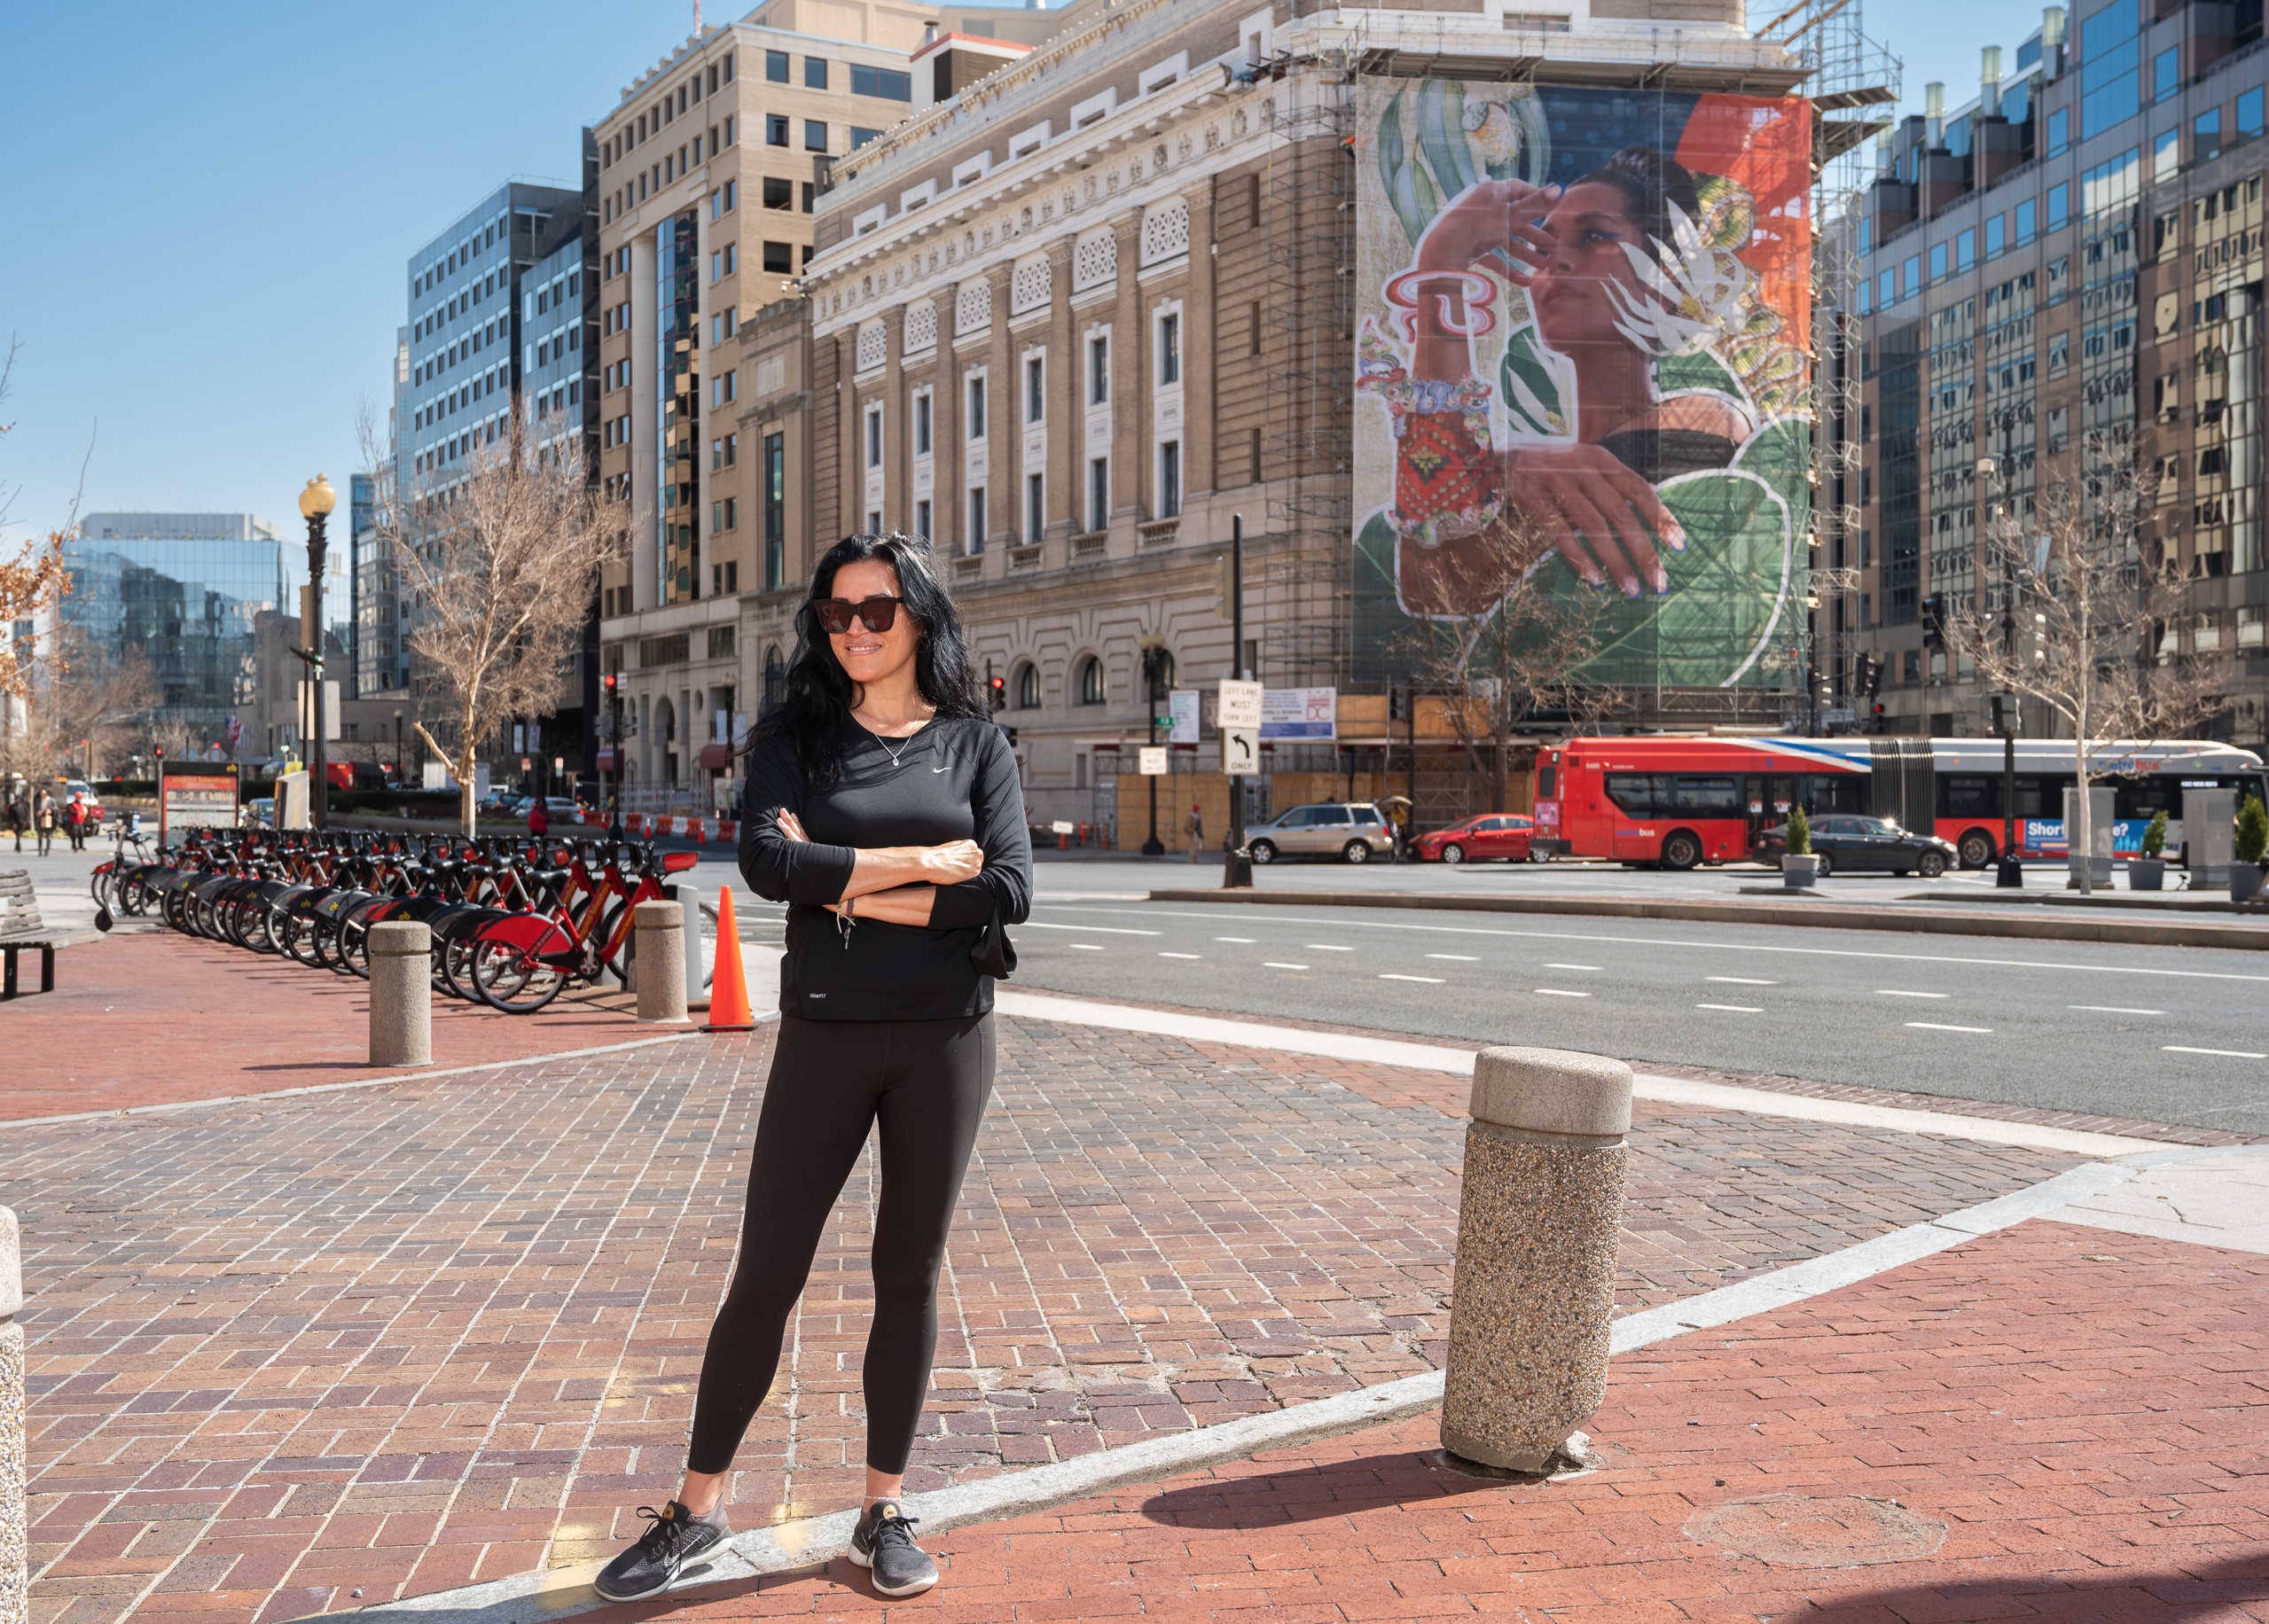 Cita Sadeli grins and stands with her arms crossed. She is a medium-light skinned adult woman with straight, black hair, wearing all black and sunglasses. Behind her, her colorful, four-story tall portrait of a medium-skinned adult woman surrounded by greenery hangs from a building.